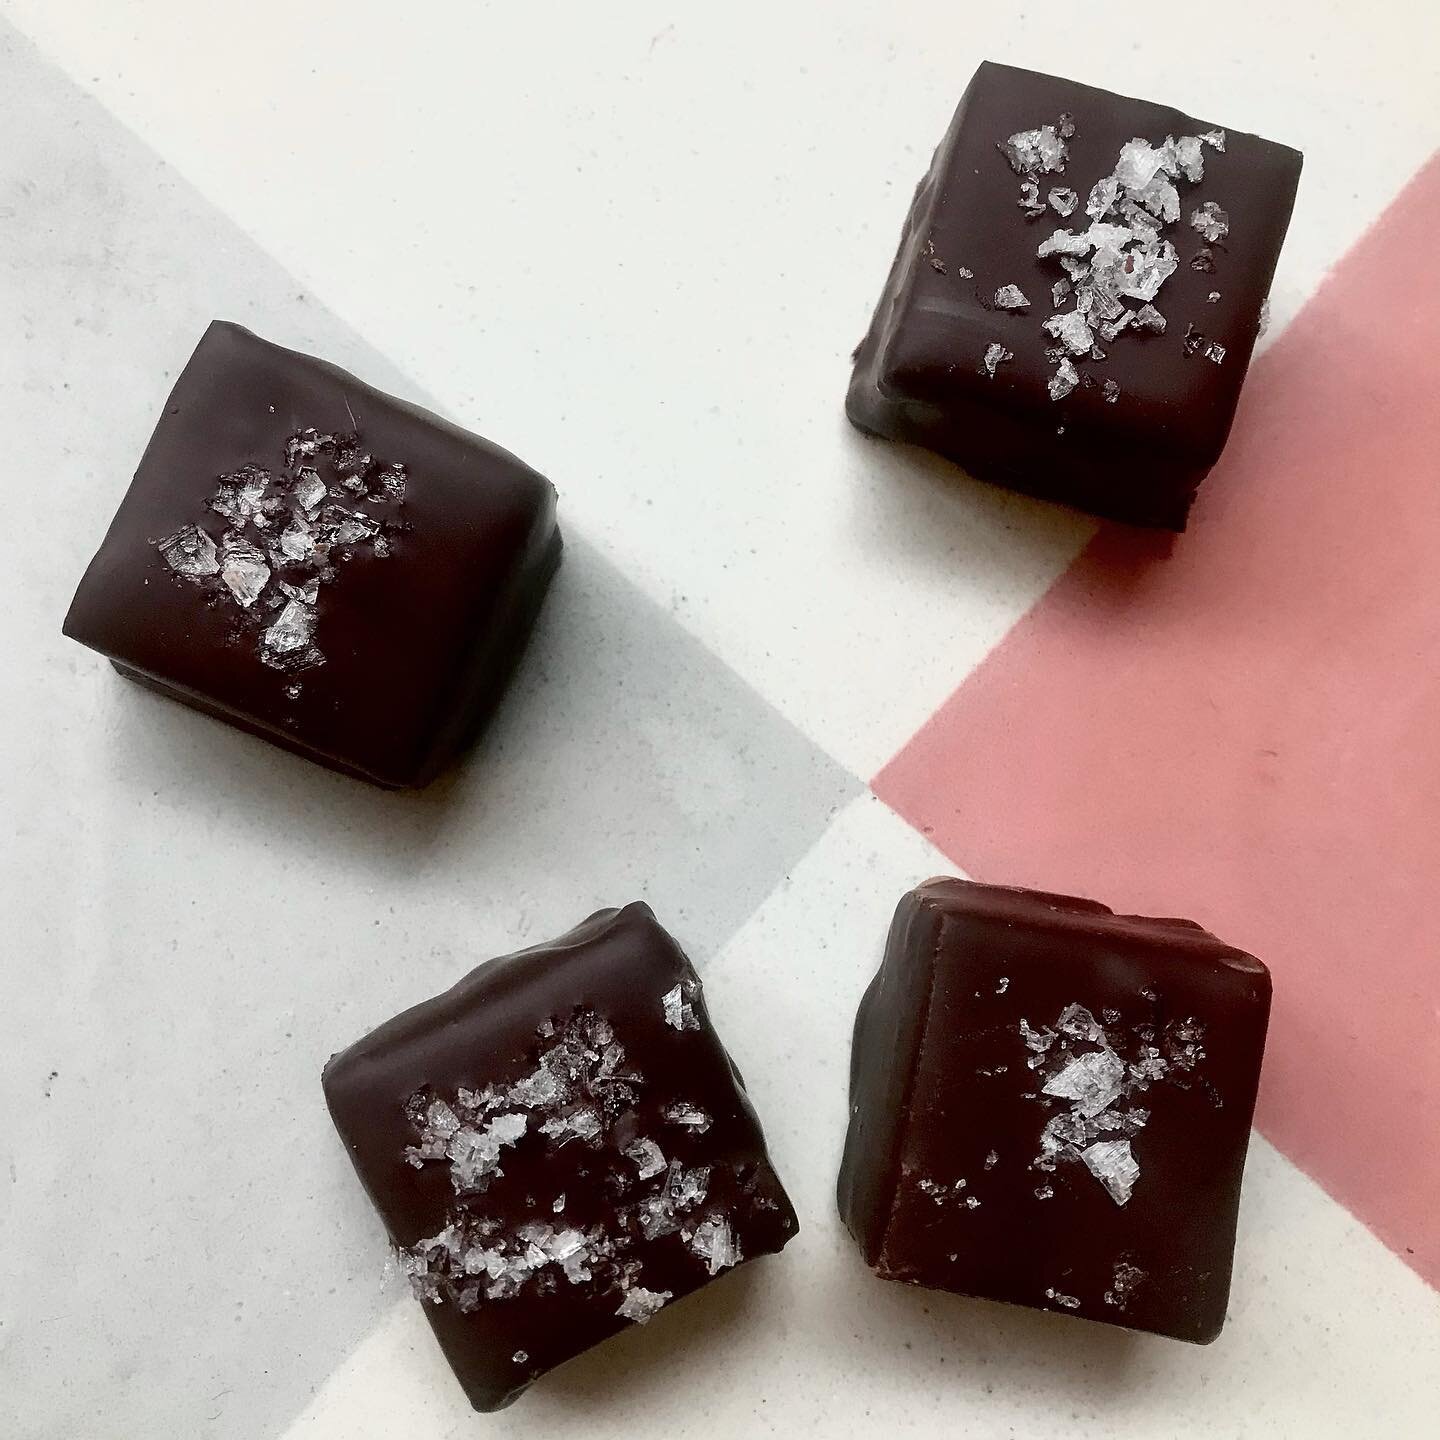 We still have bite sized raw brownies on our minds as we experiment with them in our test kitchen &hellip; we are wondering, what are your favourite flavours?

#chocolatecoveredwellness

#vegan #glutenfree #dairyfree #refinedsugarfree #plantbased #da